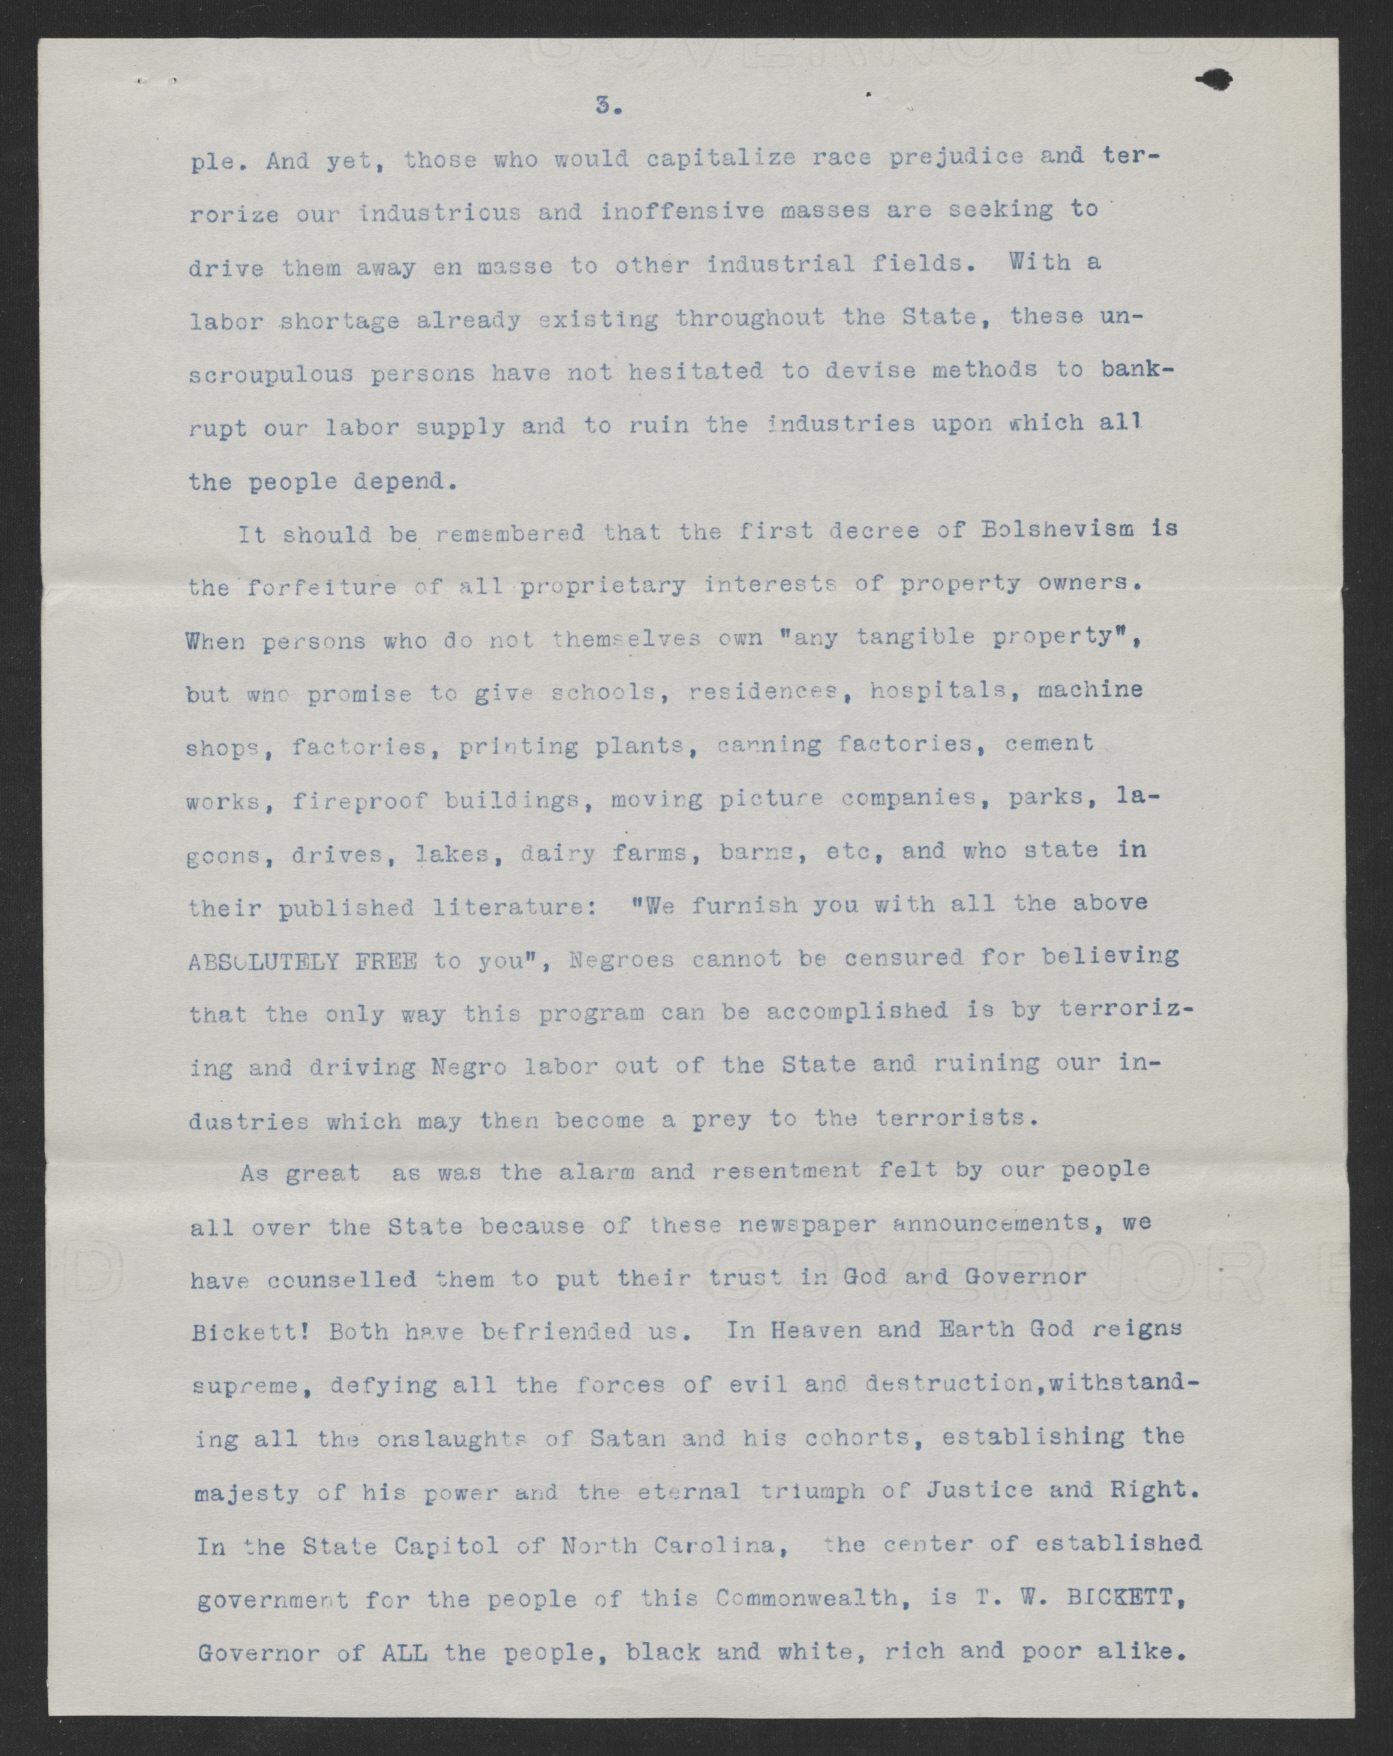 A Memorial of Thanks to Governor T. W. Bickett from the Citizens of Lexington, N.C., ca. July 1919, page 3